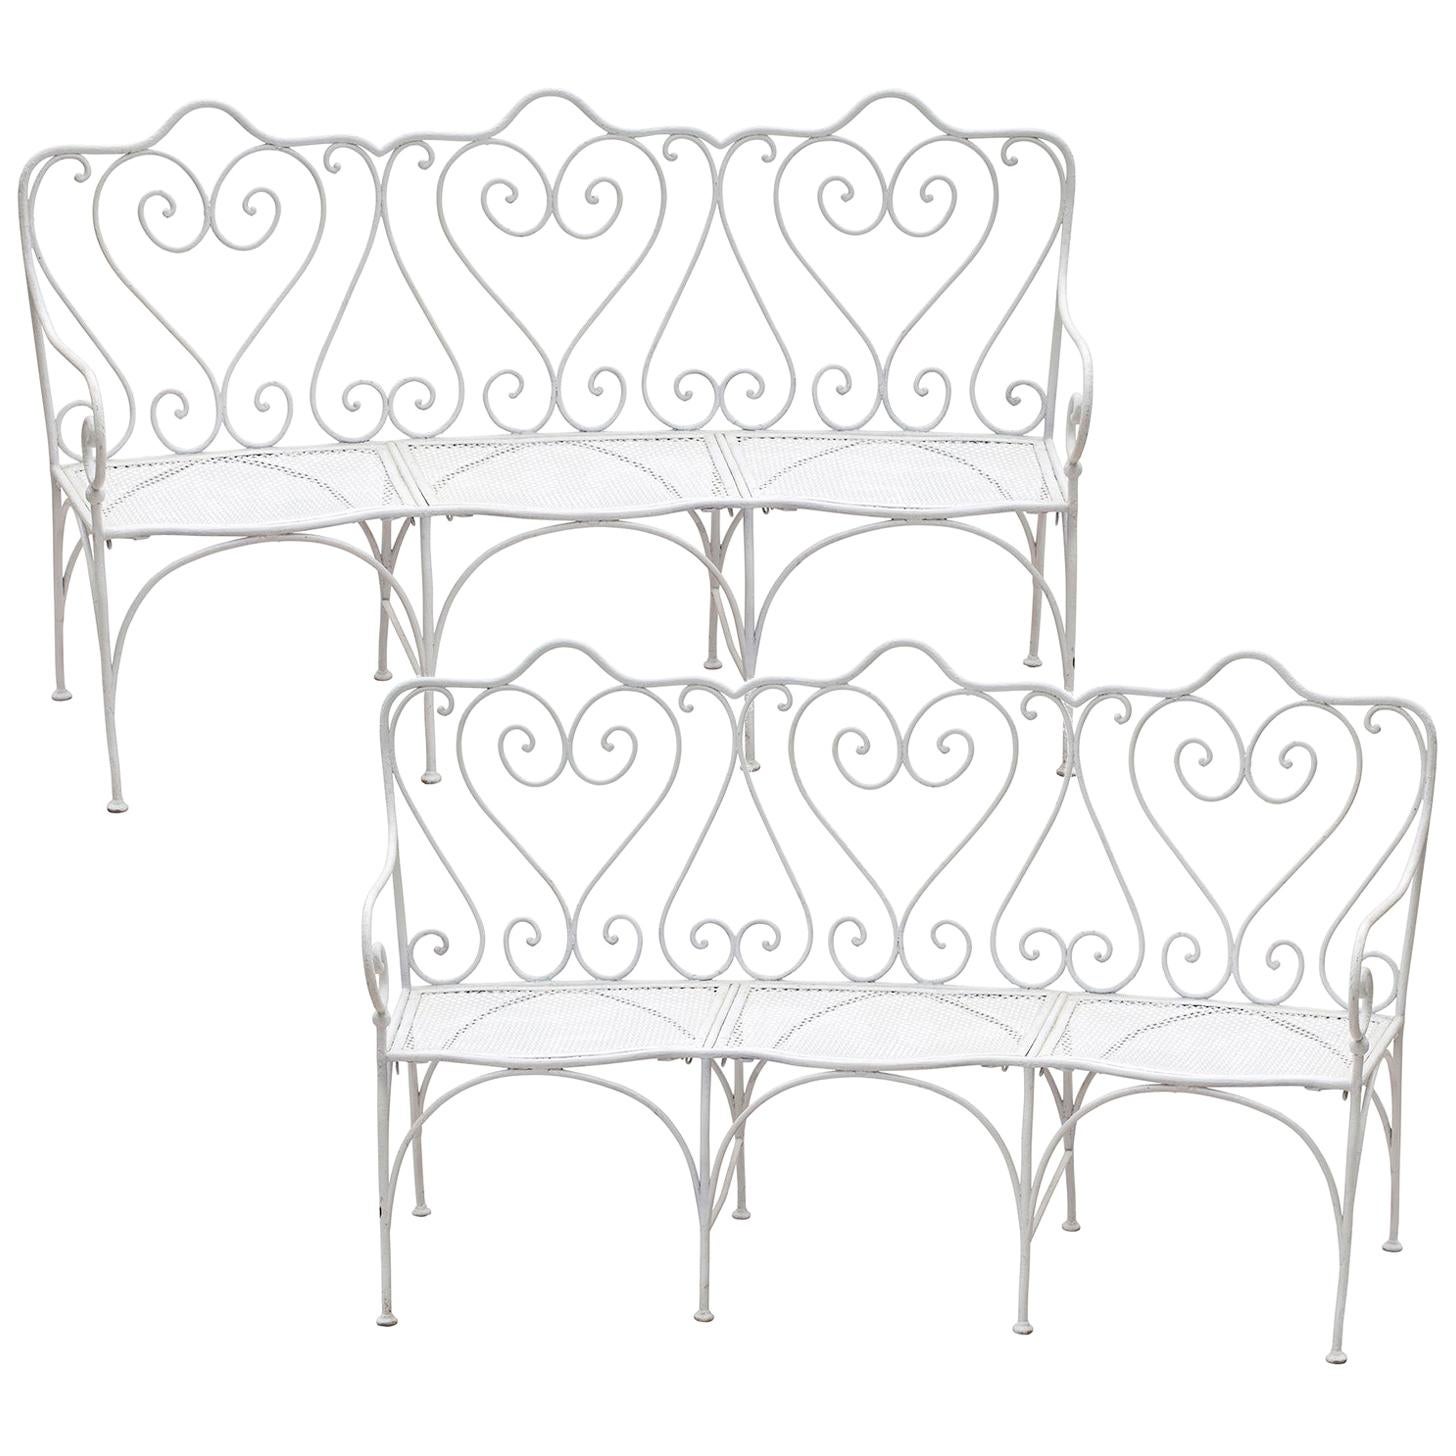 Pair of French Late 19th century Wrought Iron Garden Benches For Sale